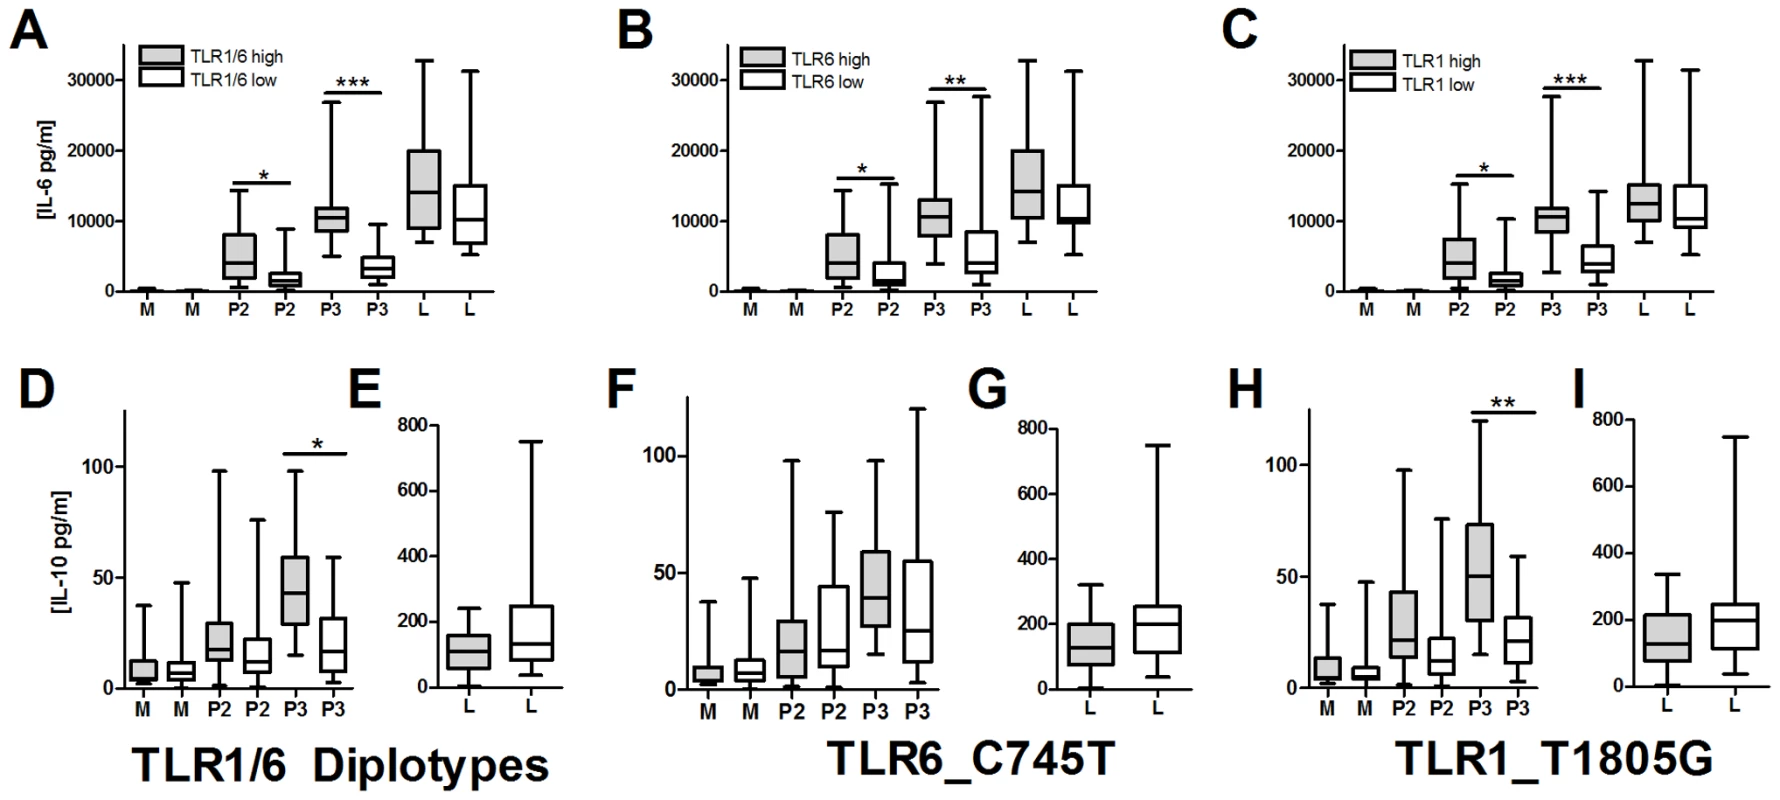 TLR1/6 polymorphisms are associated with decreased lipopeptide-induced IL-6 and IL-10 production in PBMCs.